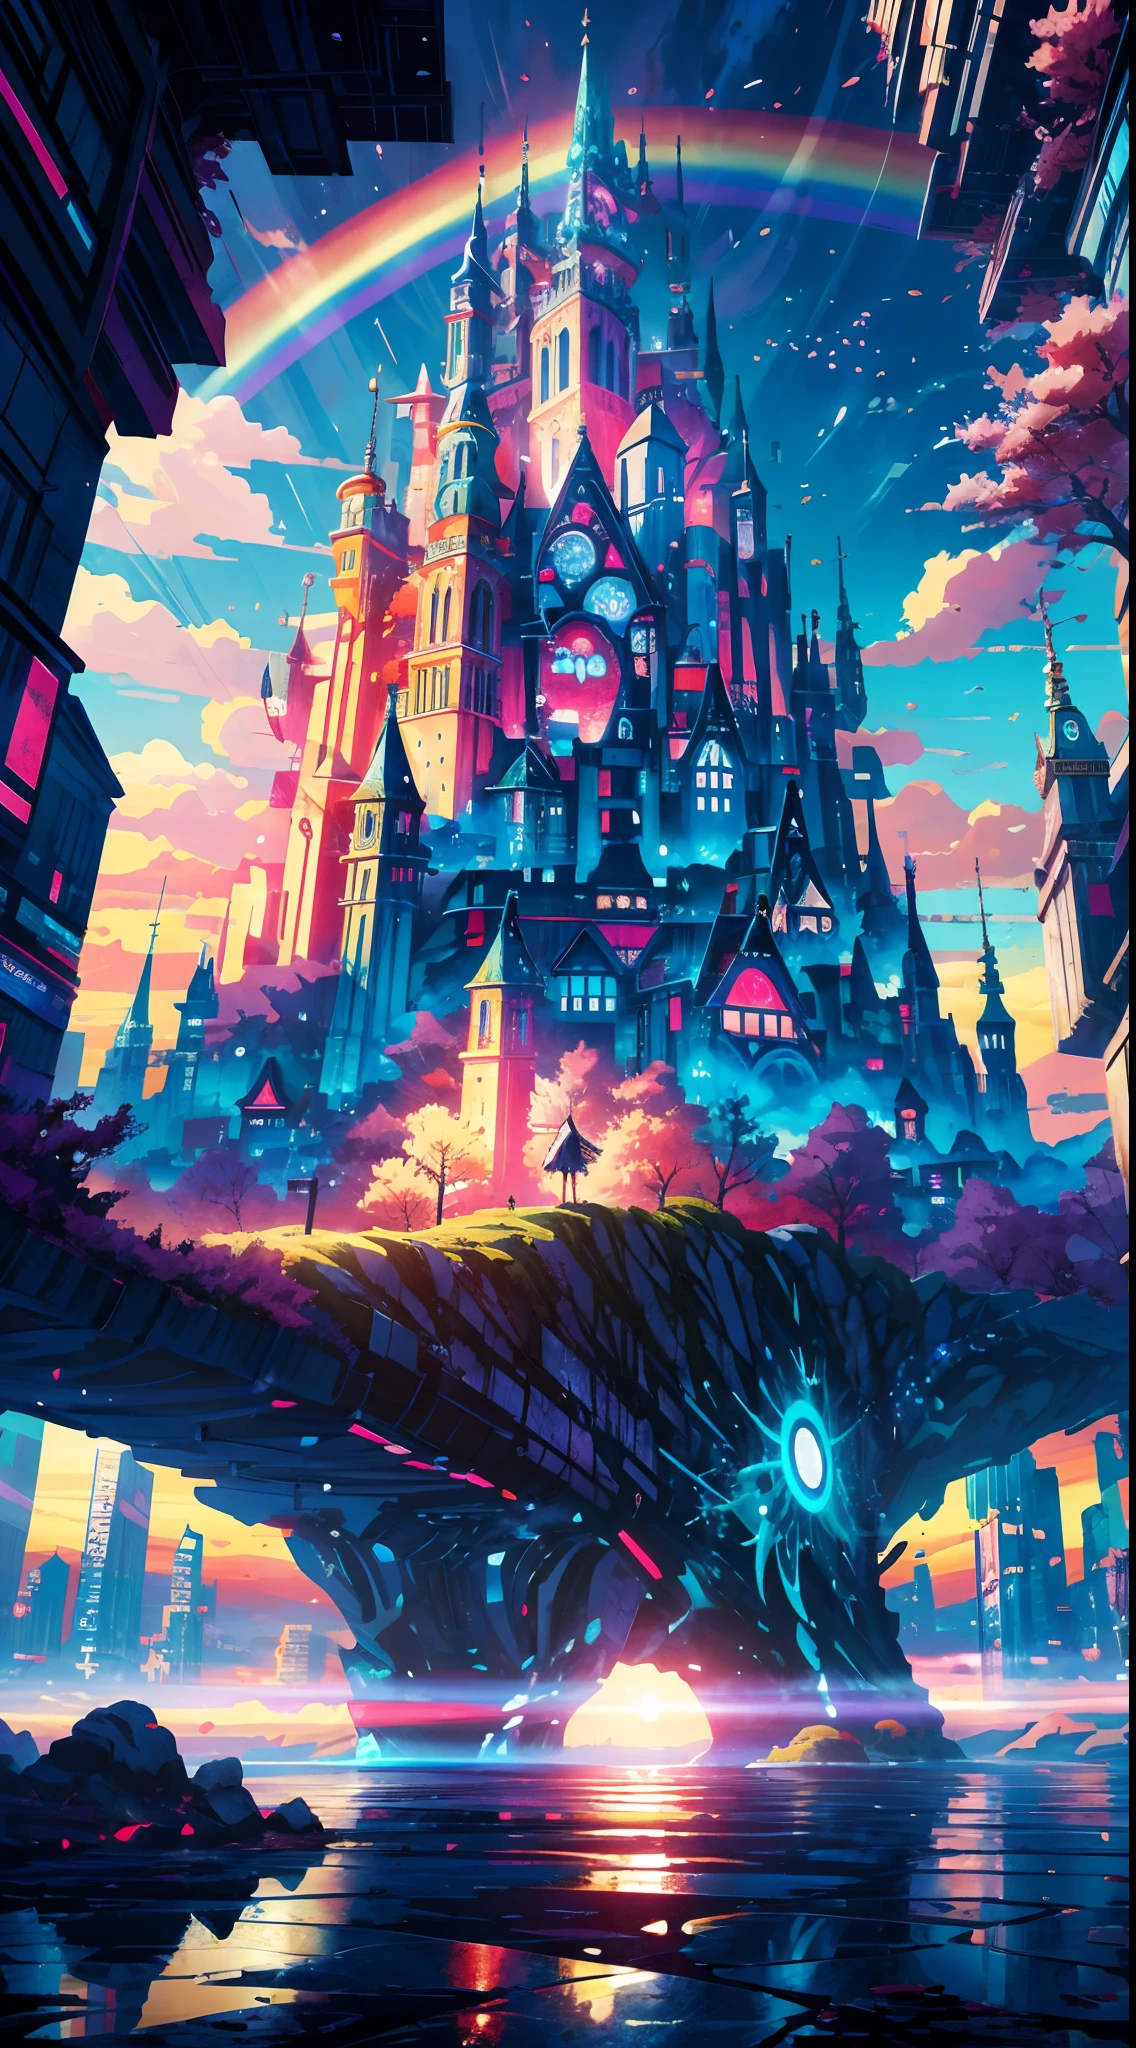 Anime girl standing in big city looking at rainbow sky,Near Future City、 Makoto Shinkai Cyril Rolando, Anime art wallpaper 4k, Anime art wallpaper 4k, Anime art wallpaper 8k, Inspired by Cyril Rolando, in the style dan mumford artwork, Amazing wallpapers, By Yuumei，Giant moving castle